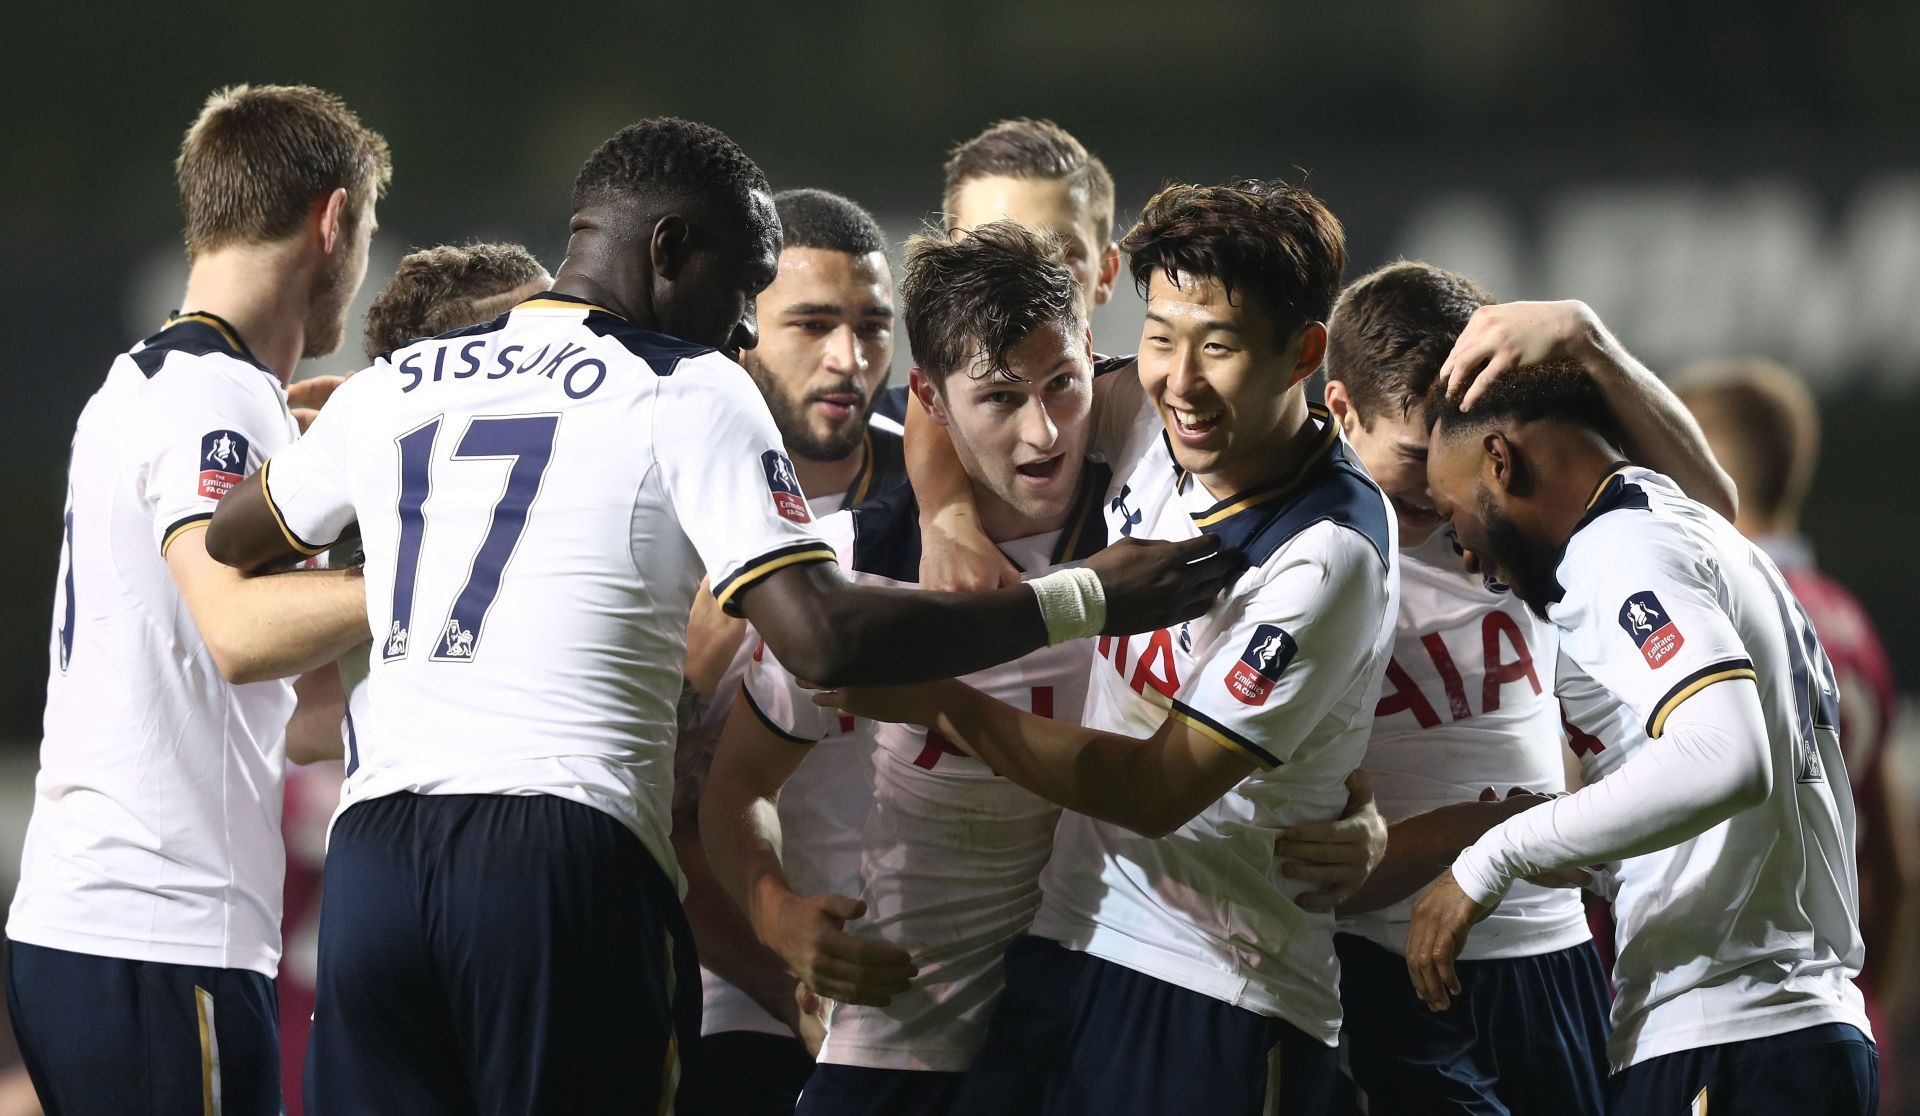 Tottenham Hotspur will be on the hunt for silverware